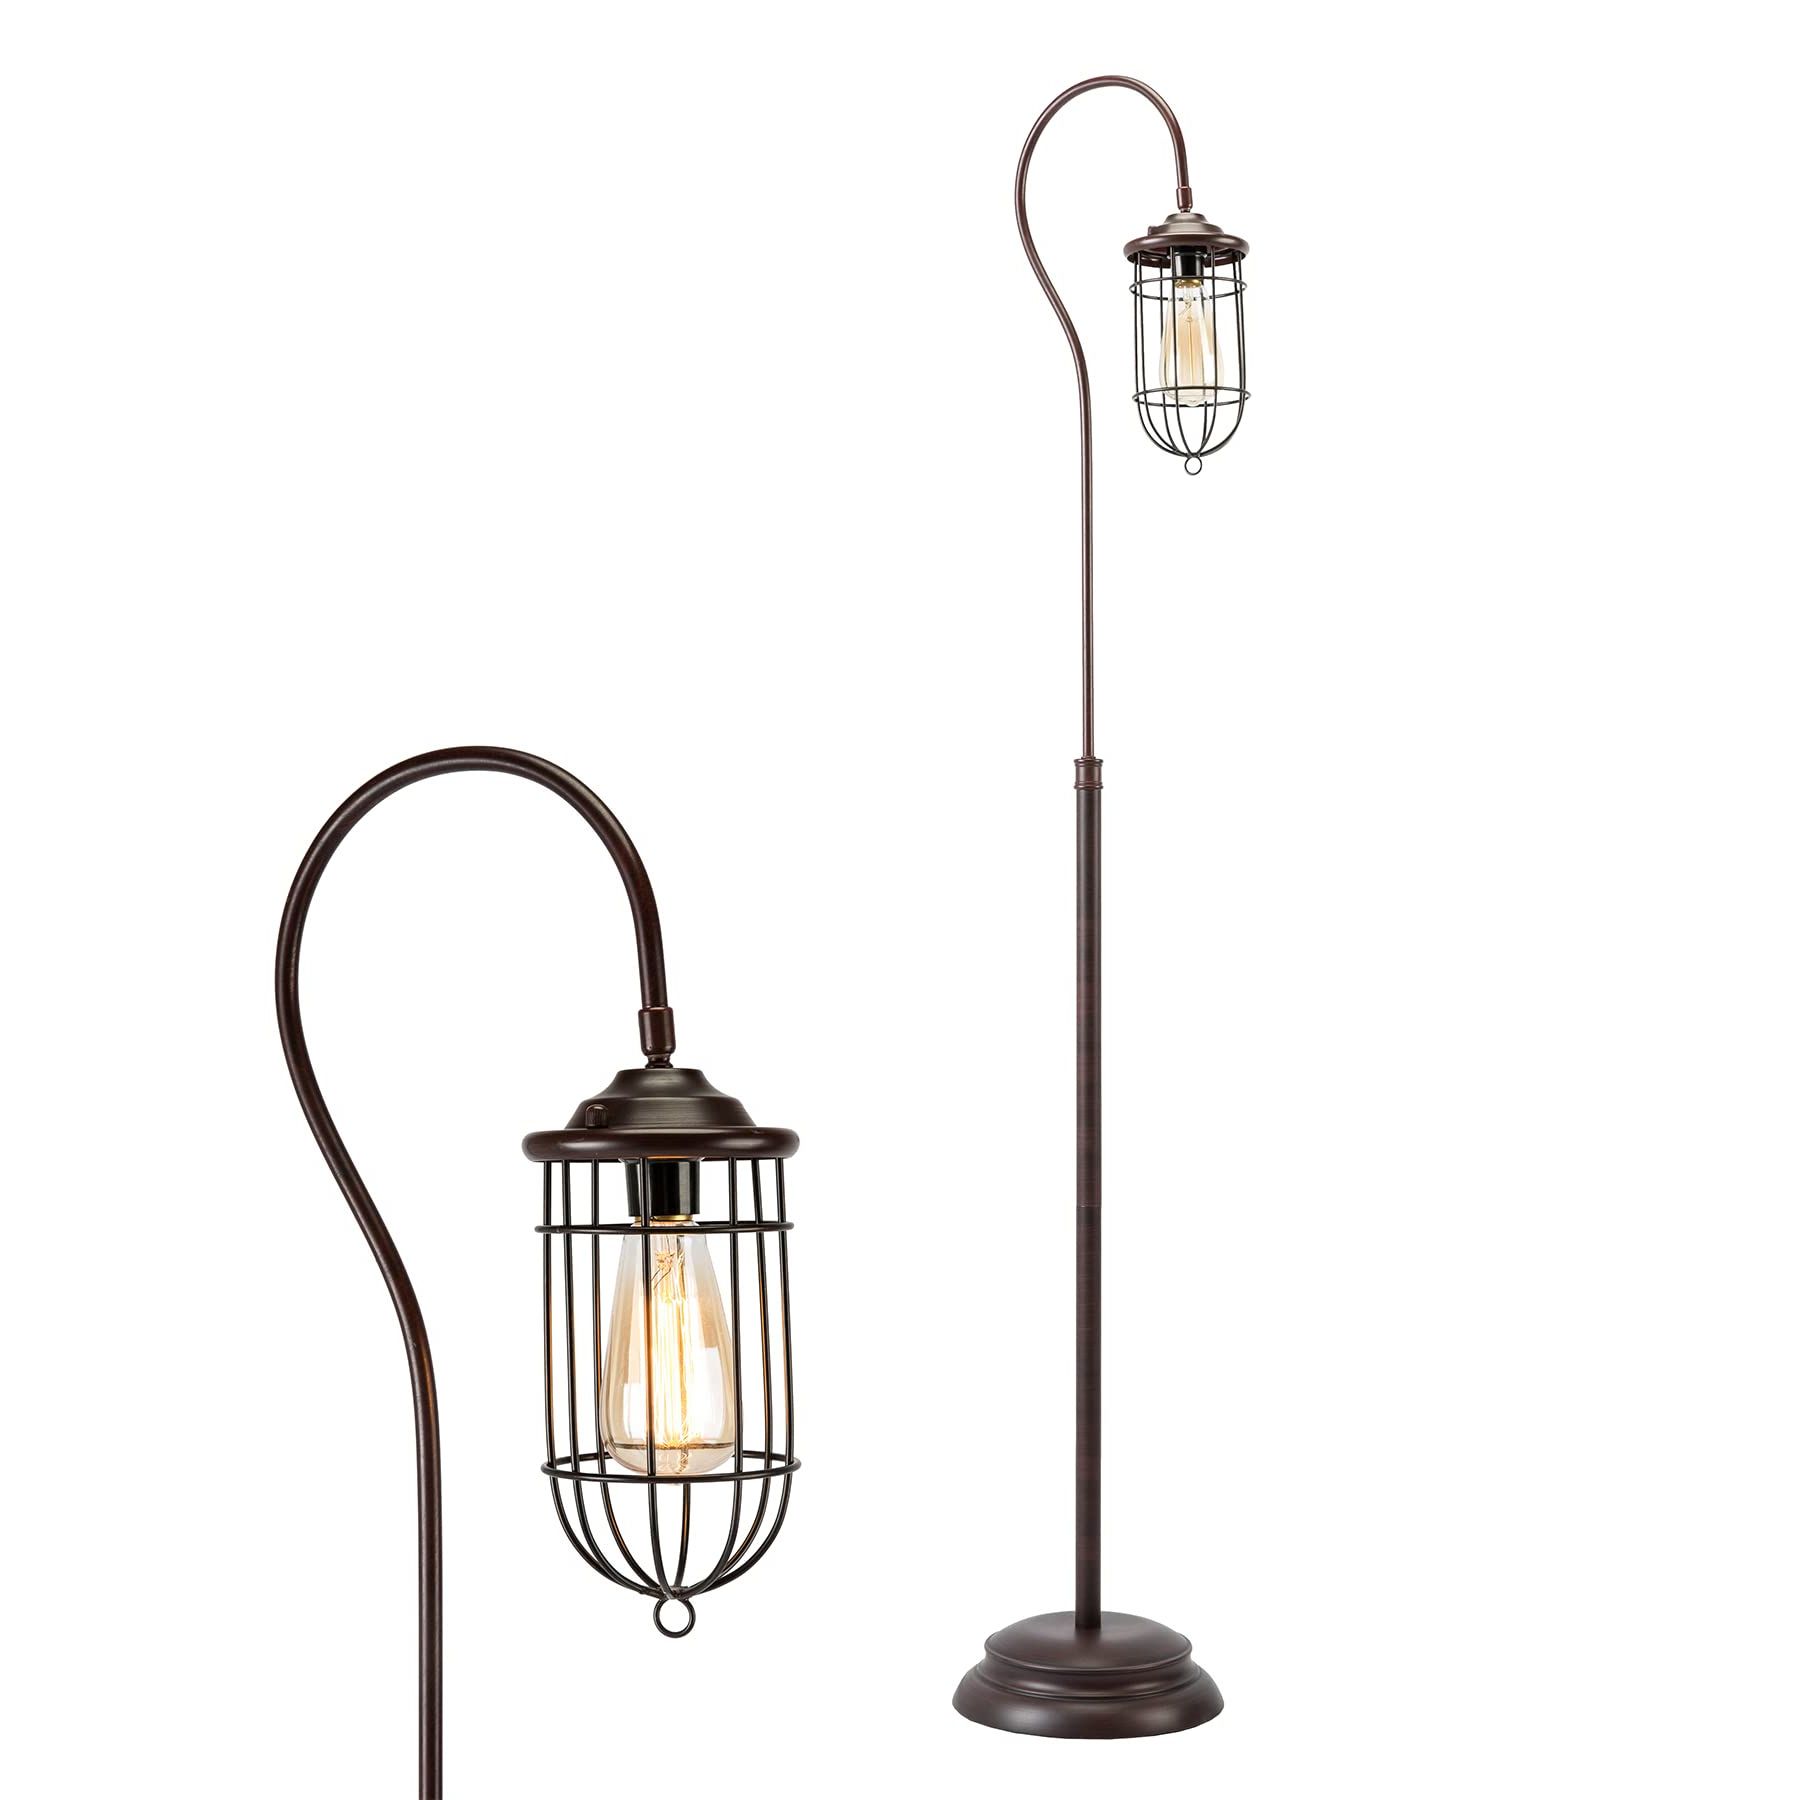 Current Vonluce Rustic 62 Inch Floor Lamp, Adjustable Lantern Lamp Head, 100w  Industrial Farmhouse Standing Light, Nautical Within 62 Inch Standing Lamps (View 8 of 15)